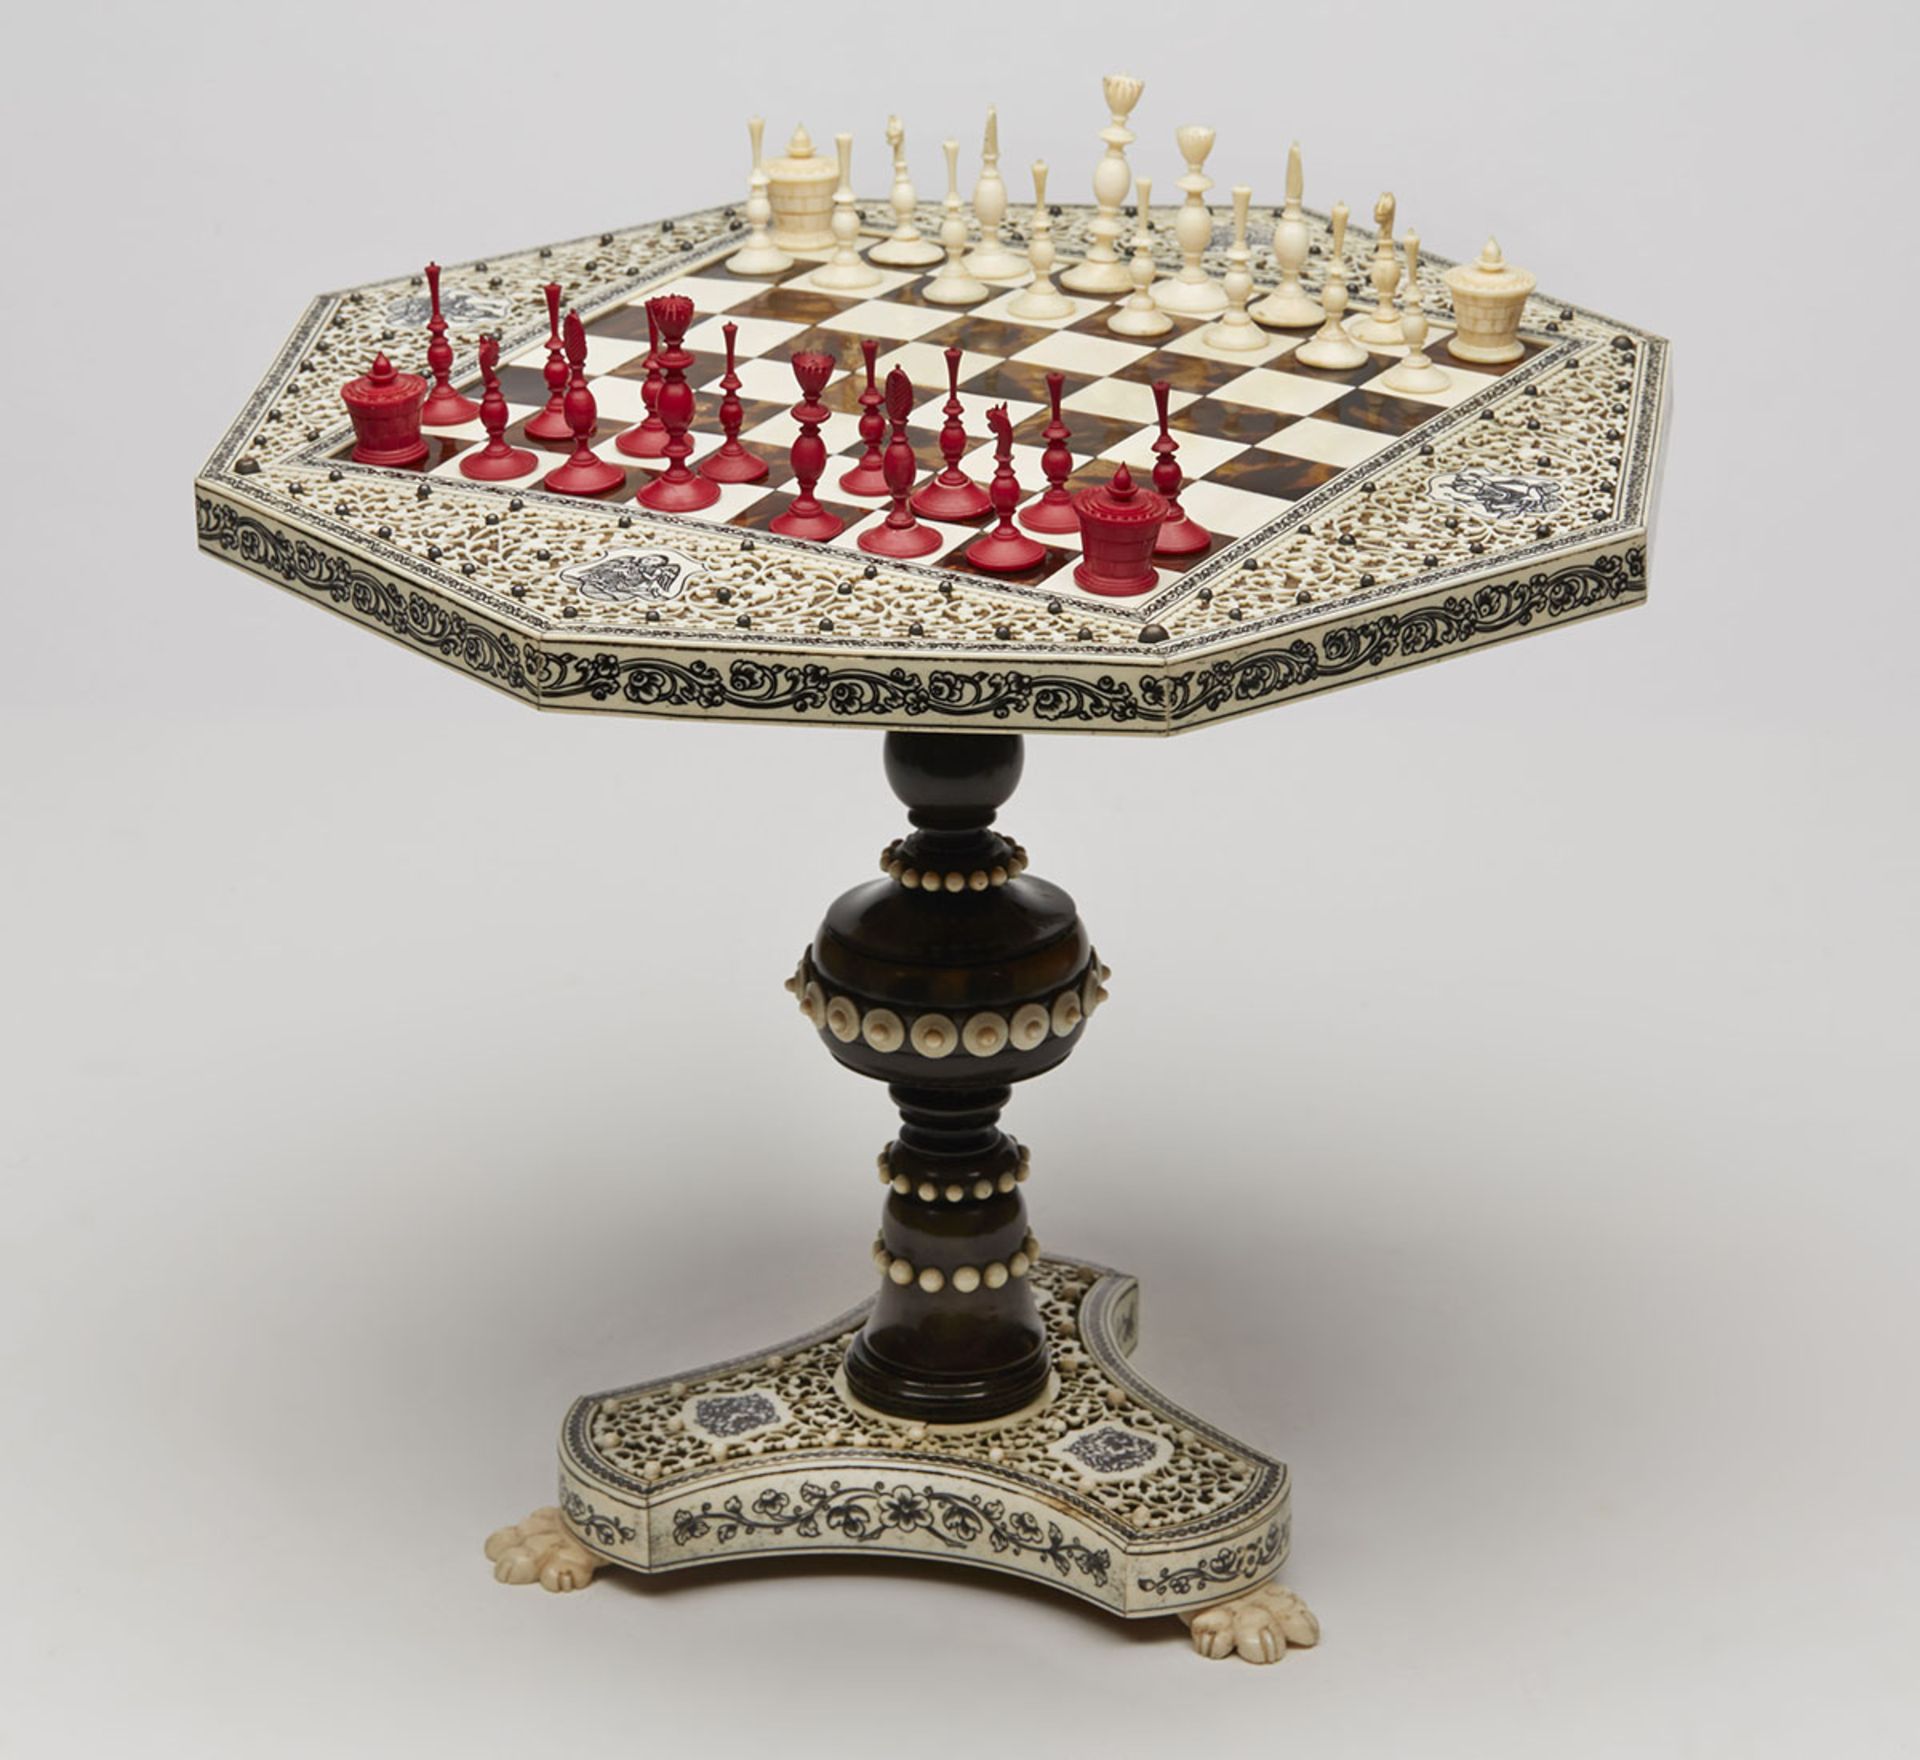 Exceptional & Rare Anglo-Indian Miniature Games Table 19 C.